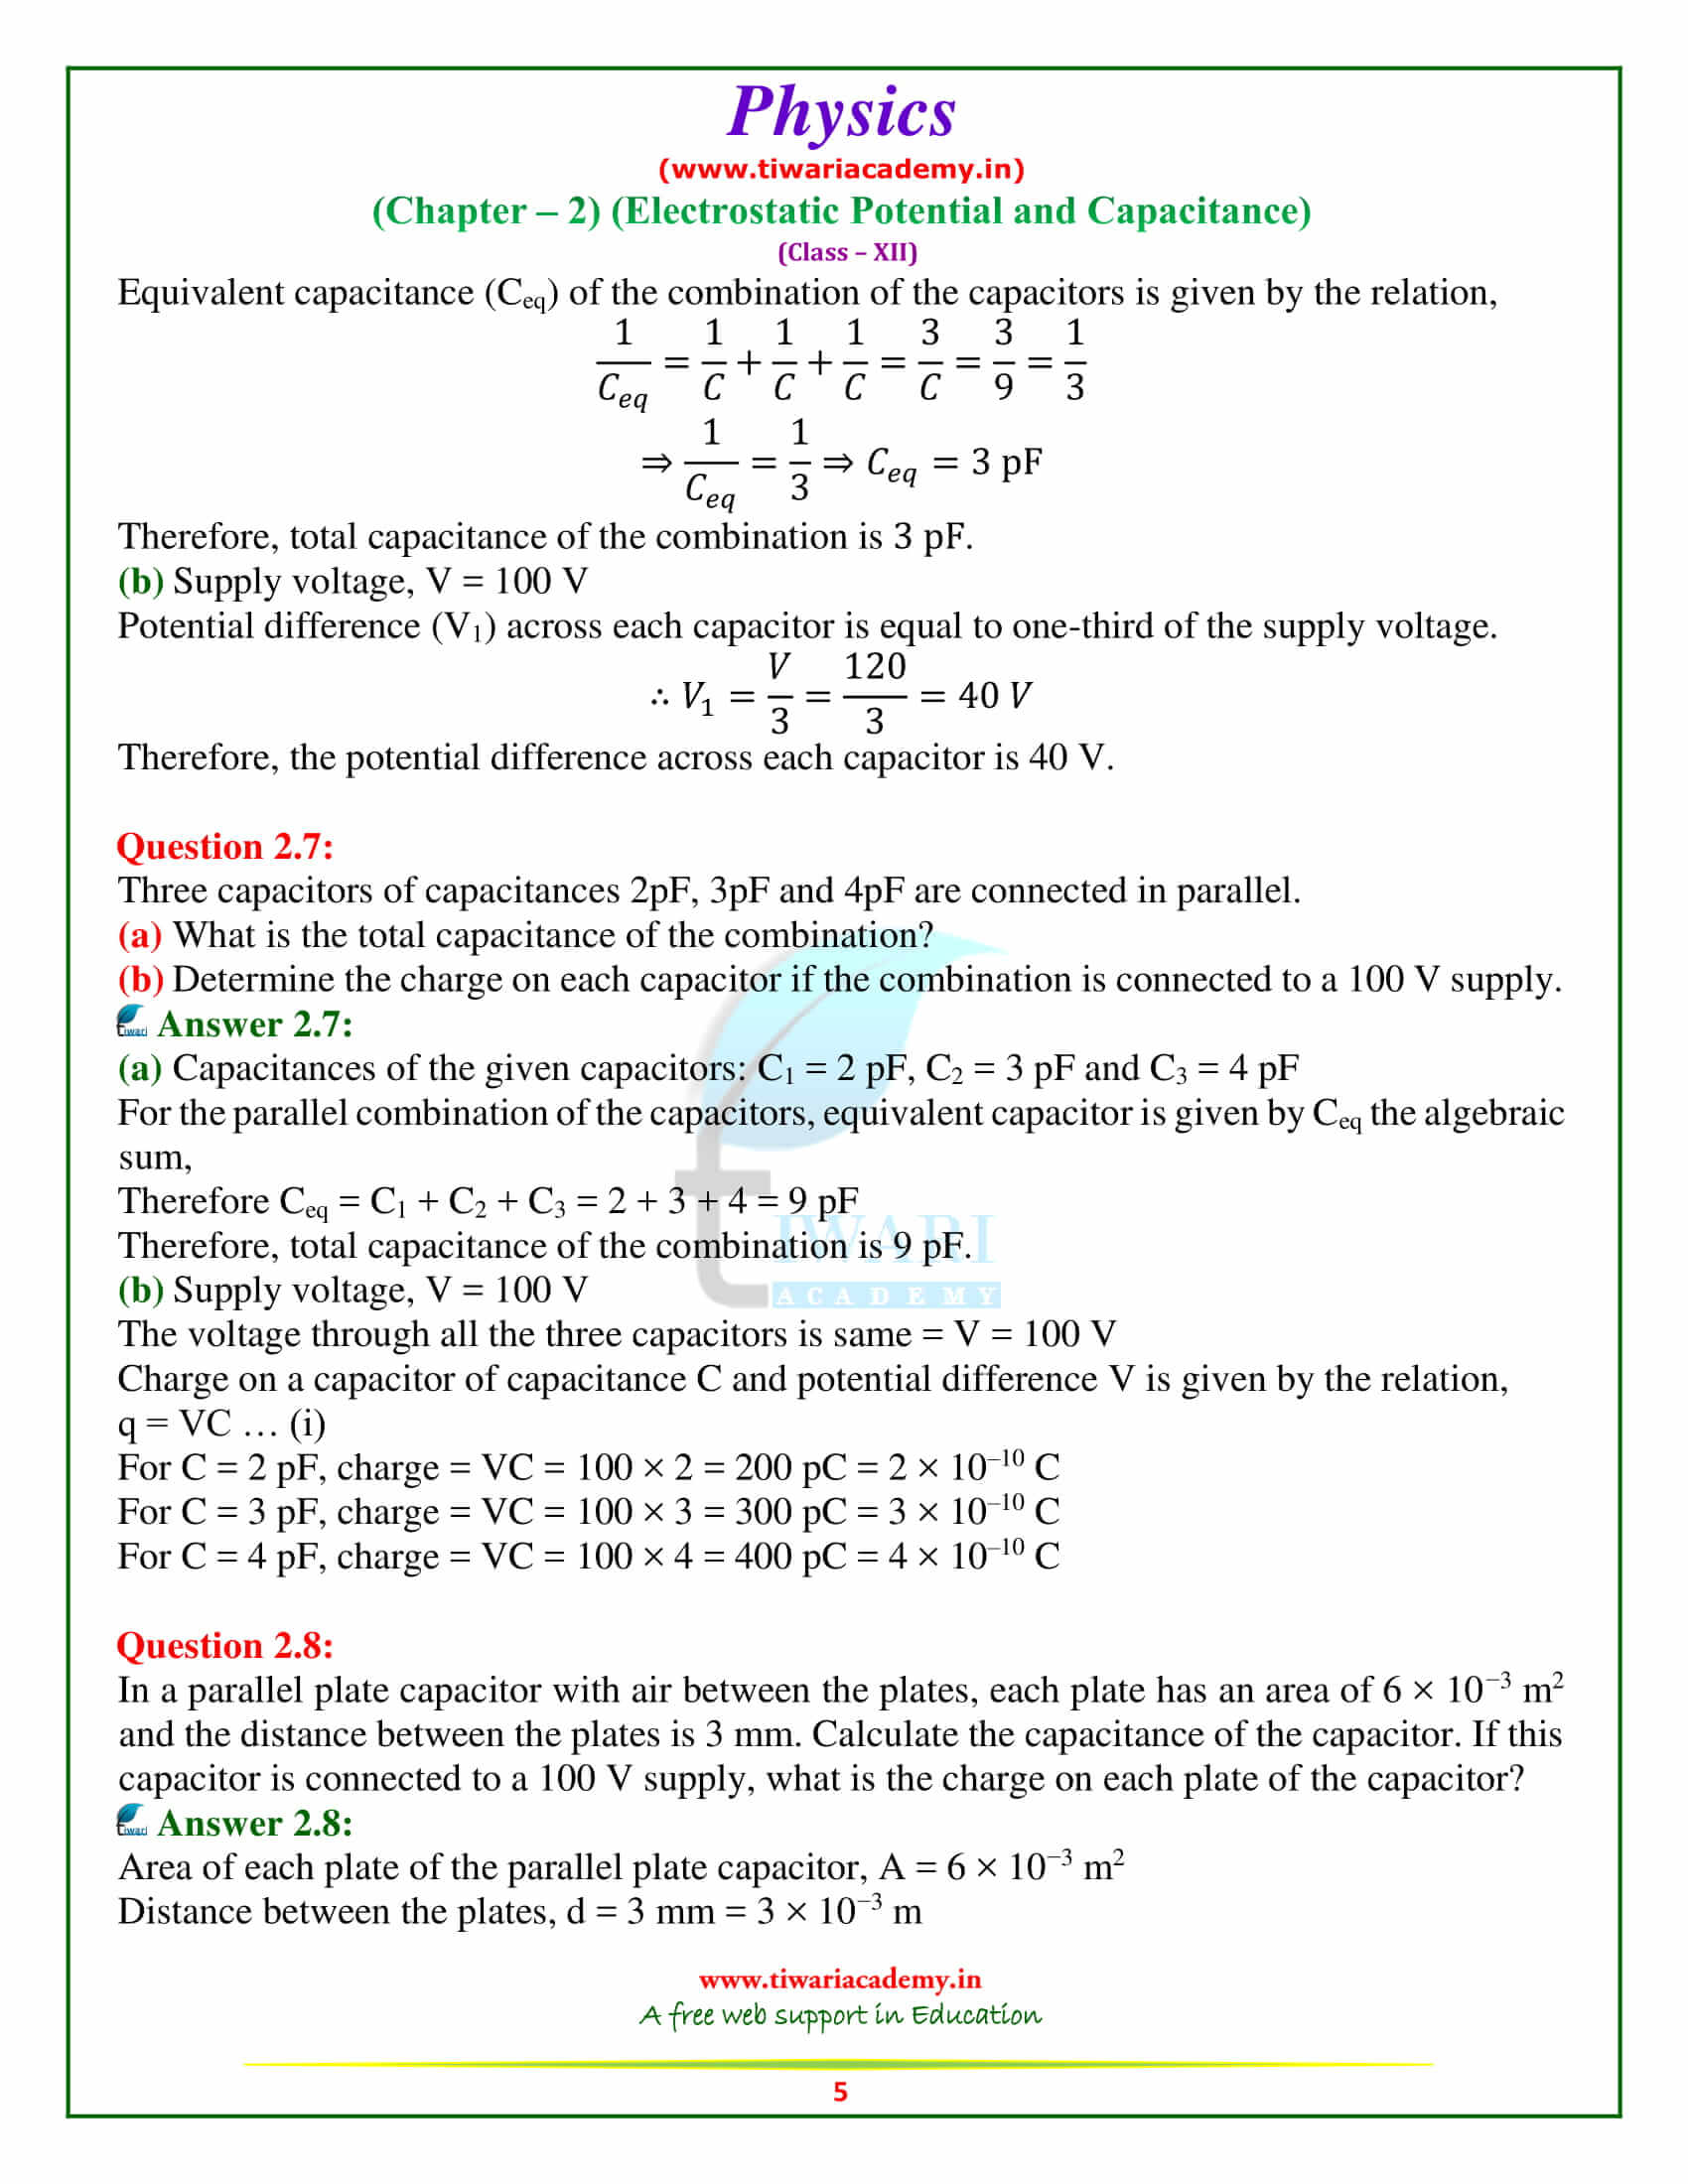 NCERT Solutions for Class 12 Physics Chapter 2 in free pdf download